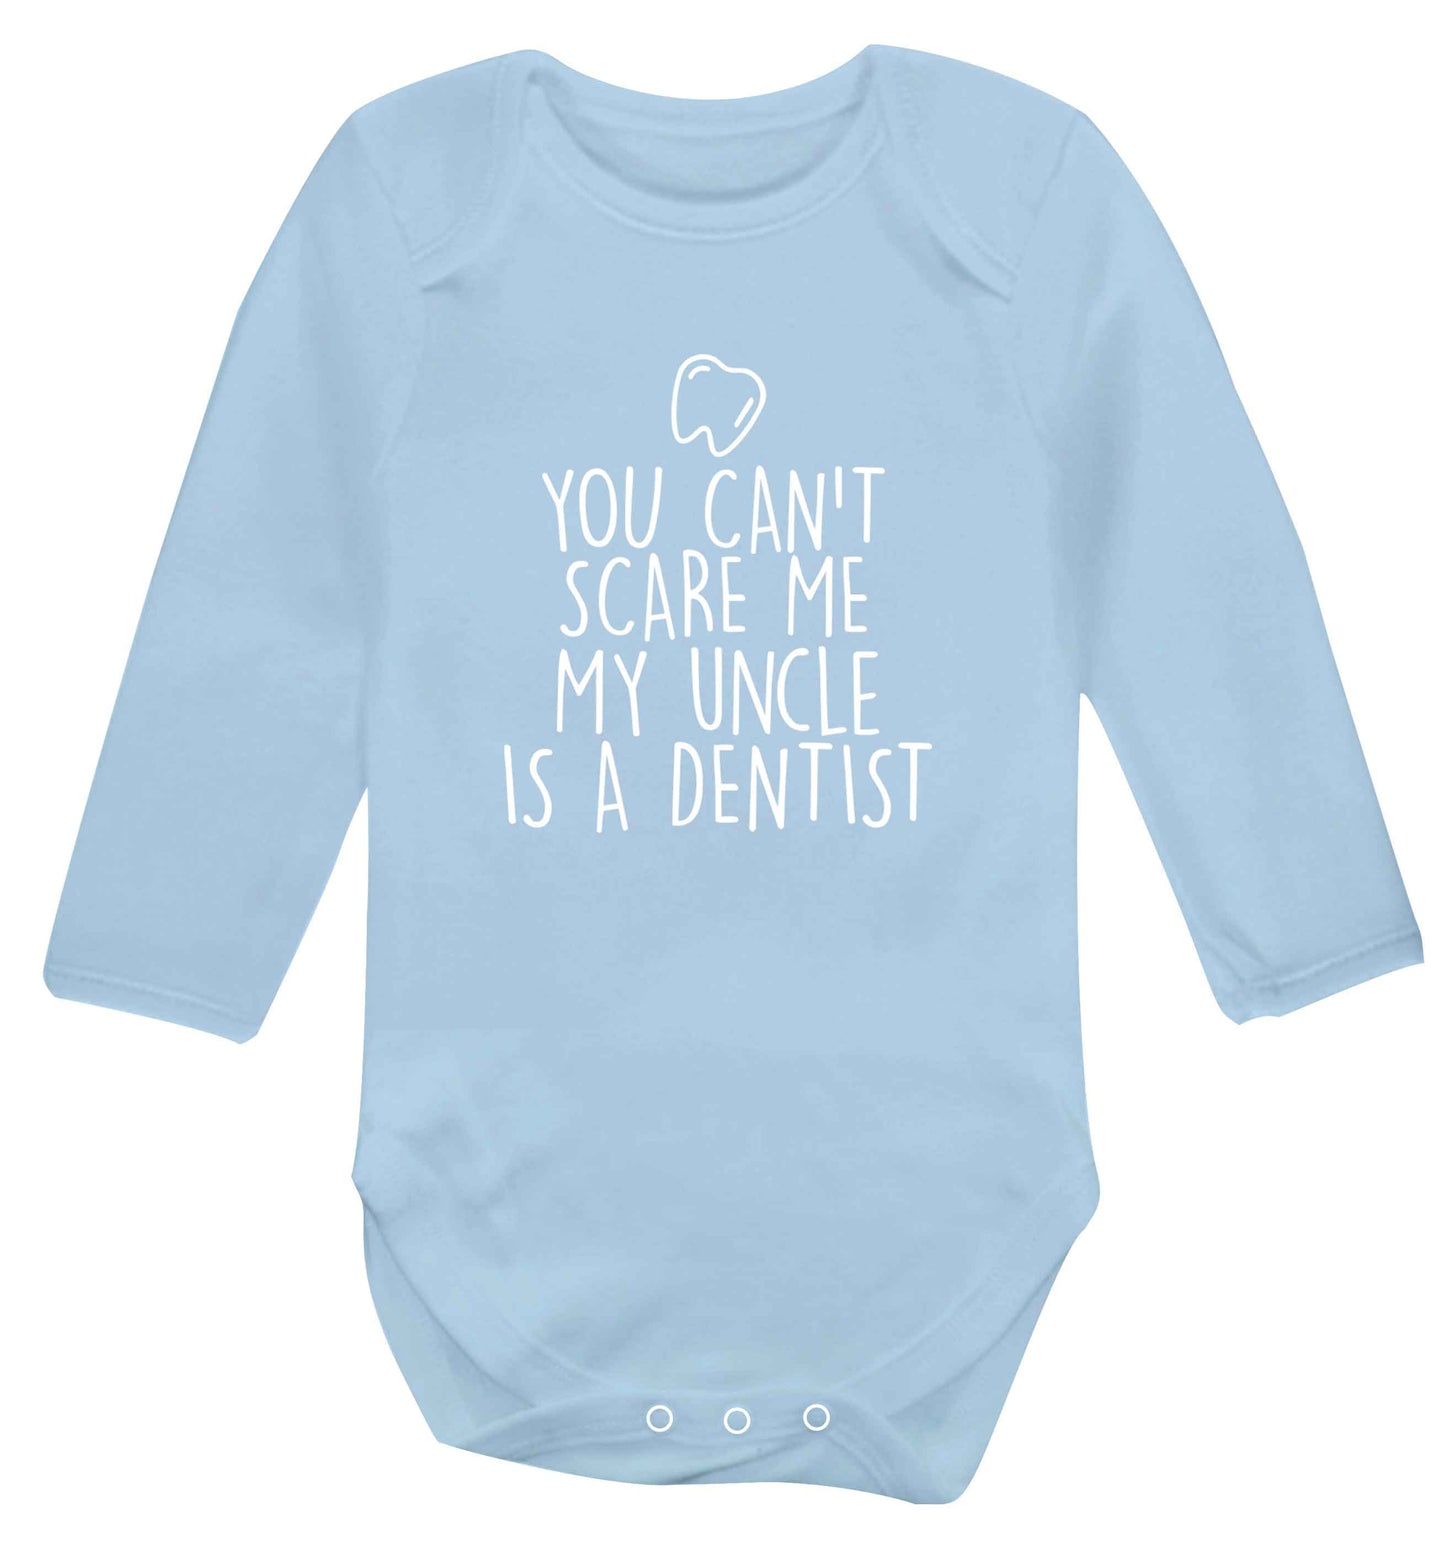 You can't scare me my uncle is a dentist baby vest long sleeved pale blue 6-12 months